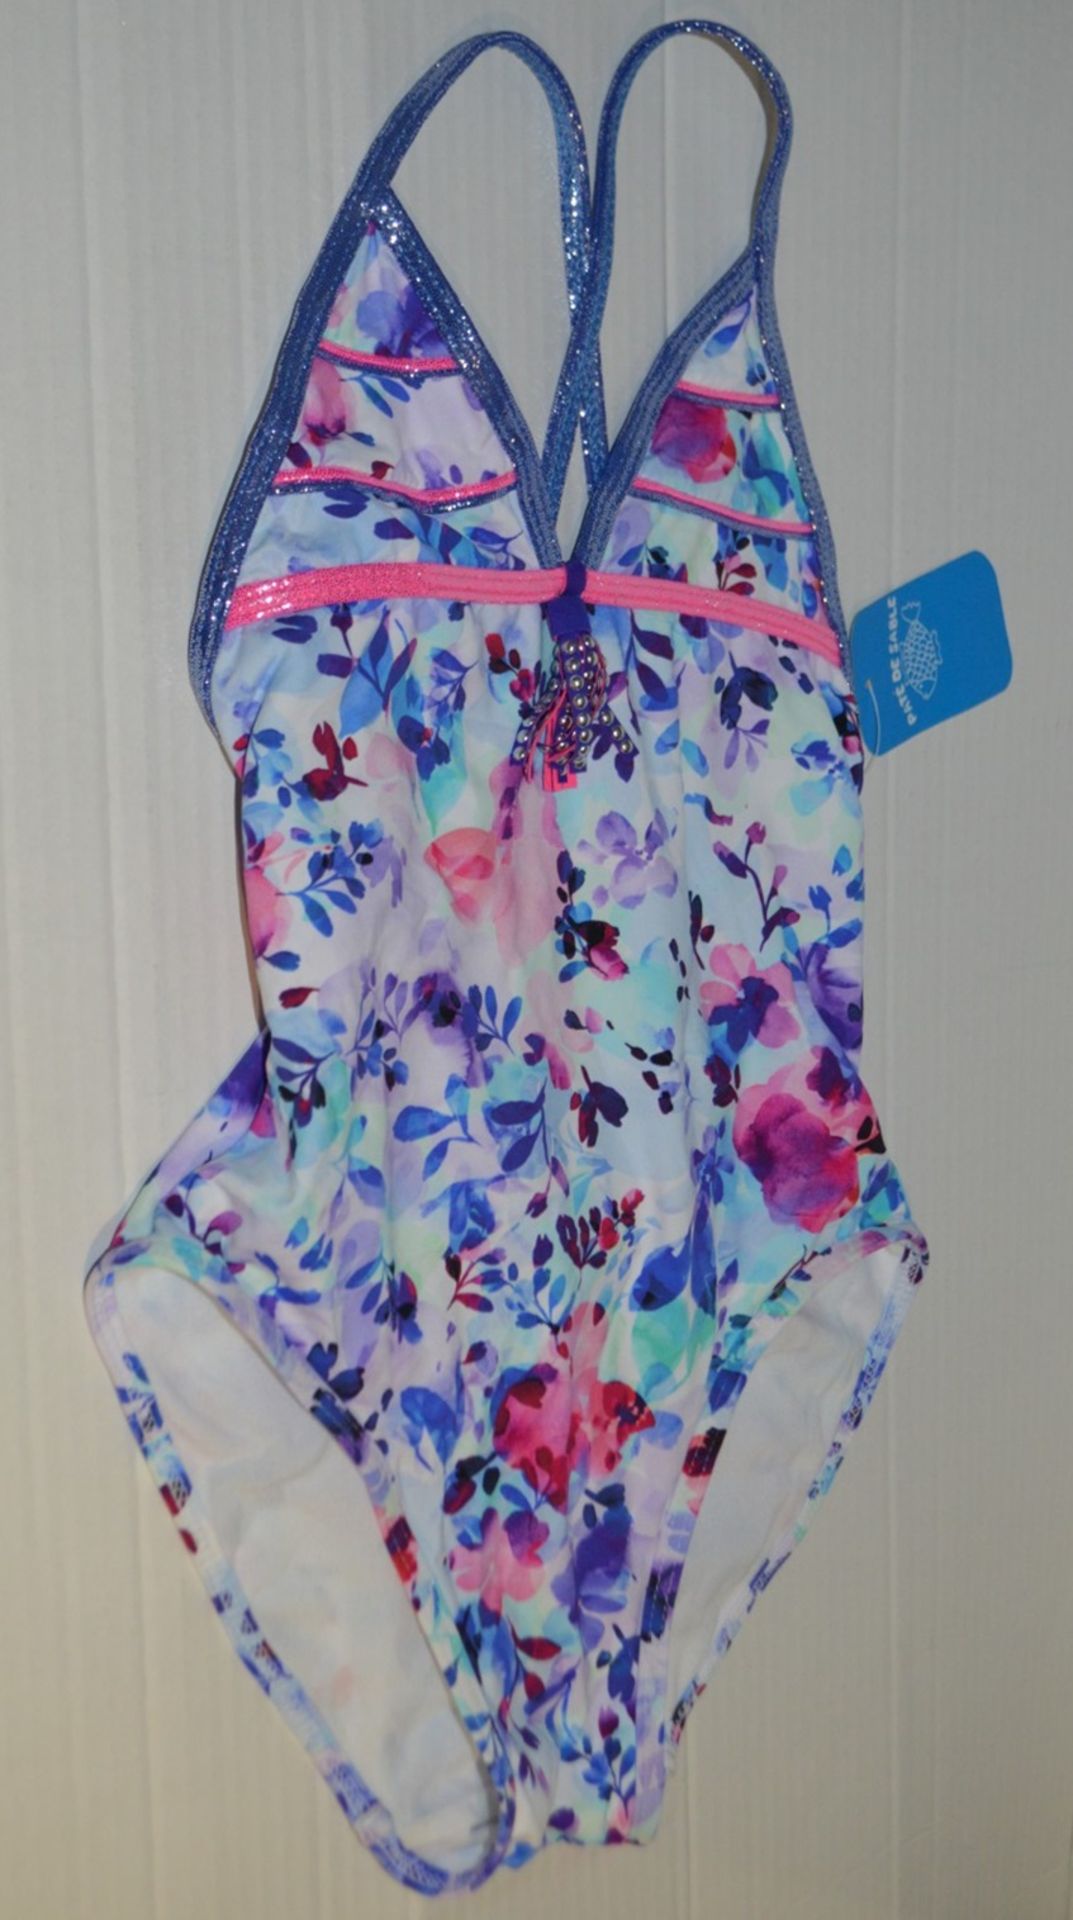 1 x PATE DE SABLE Swimsuit - New With Tags - Size: 10A - Ref: BPMTO9 - CL580 - NO VAT ON THE HAMM